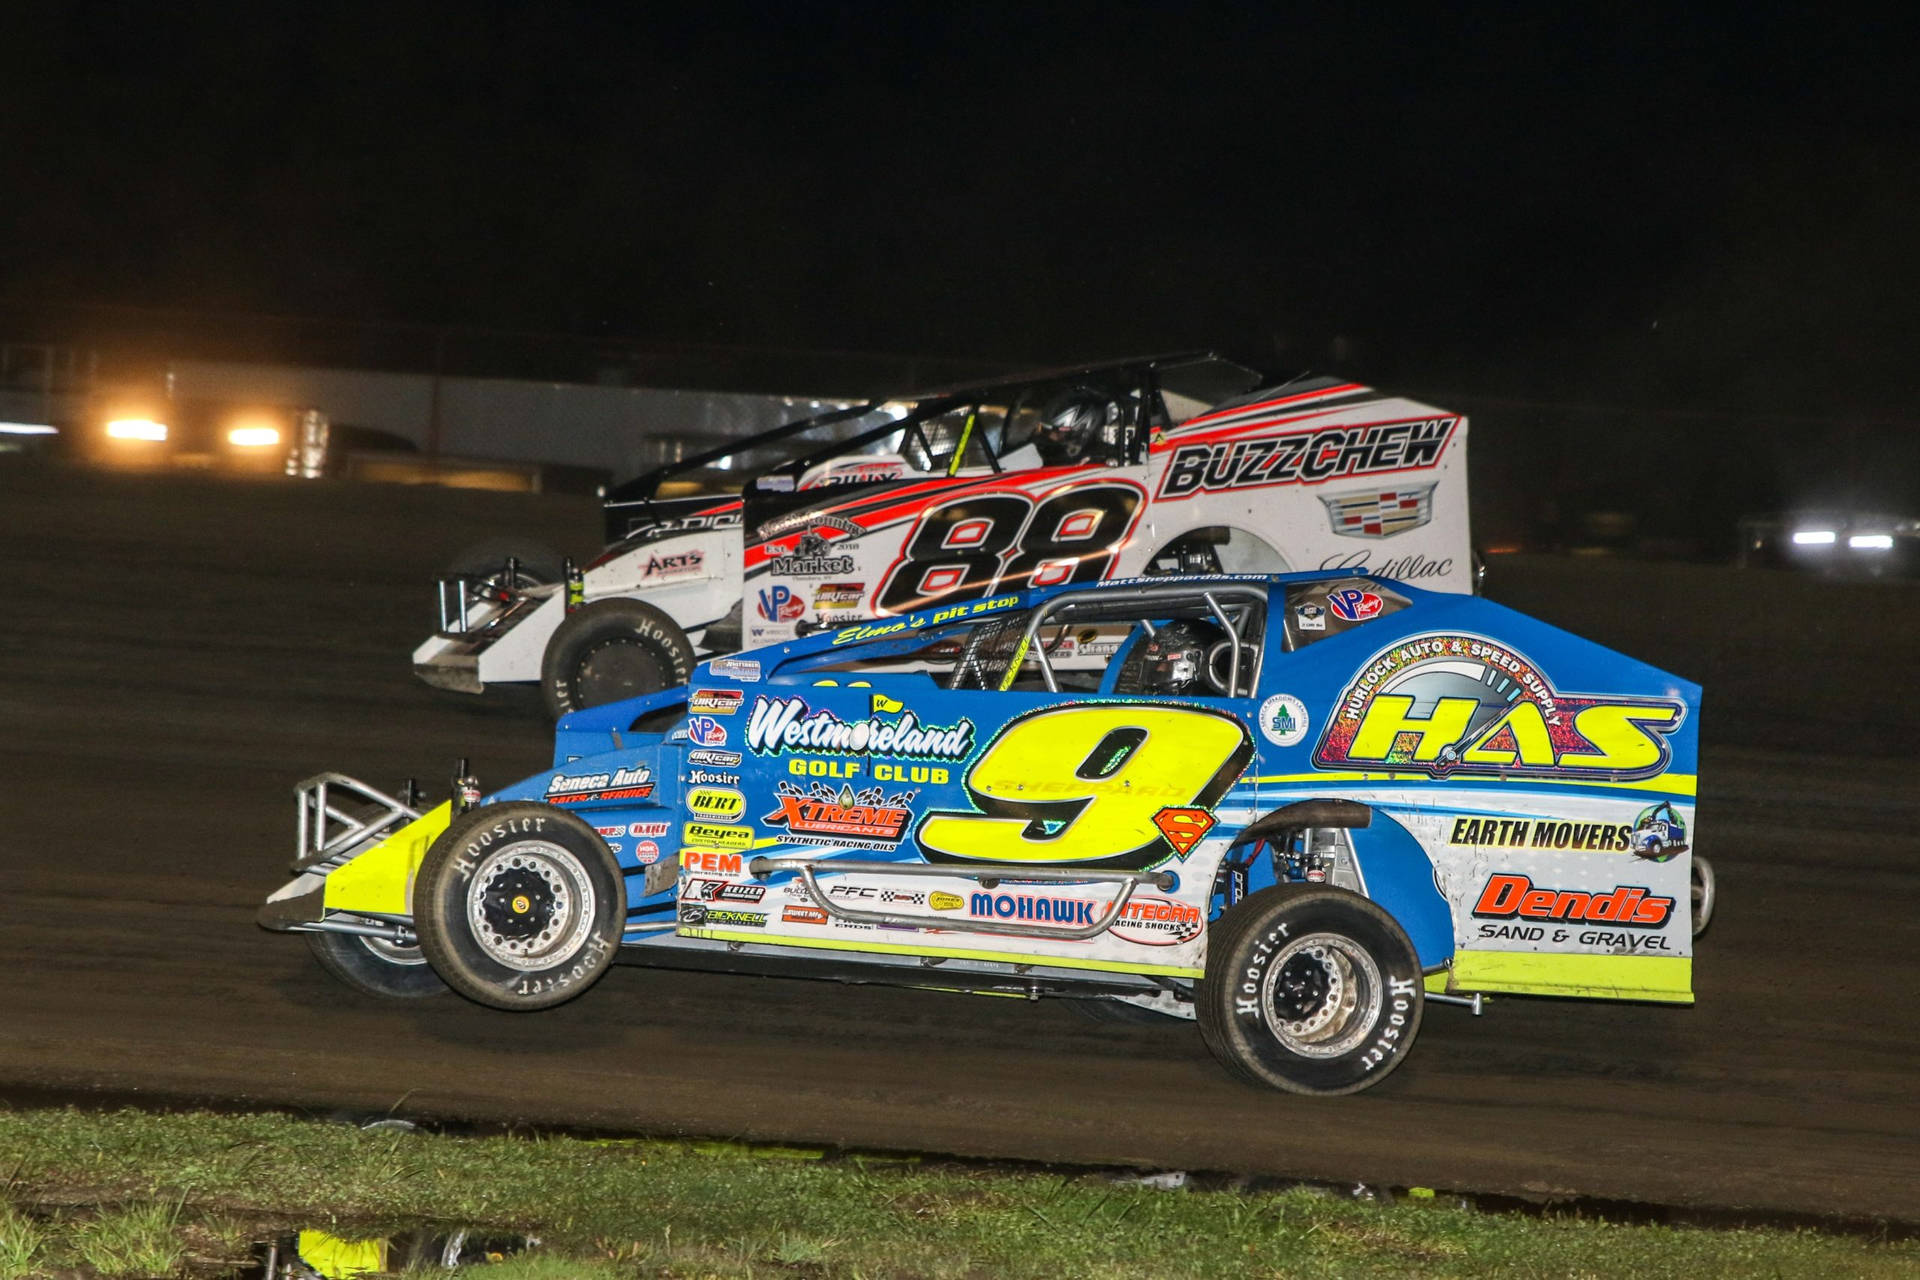 Two Dirt Race Cars Racing On A Dirt Track At Night Wallpaper